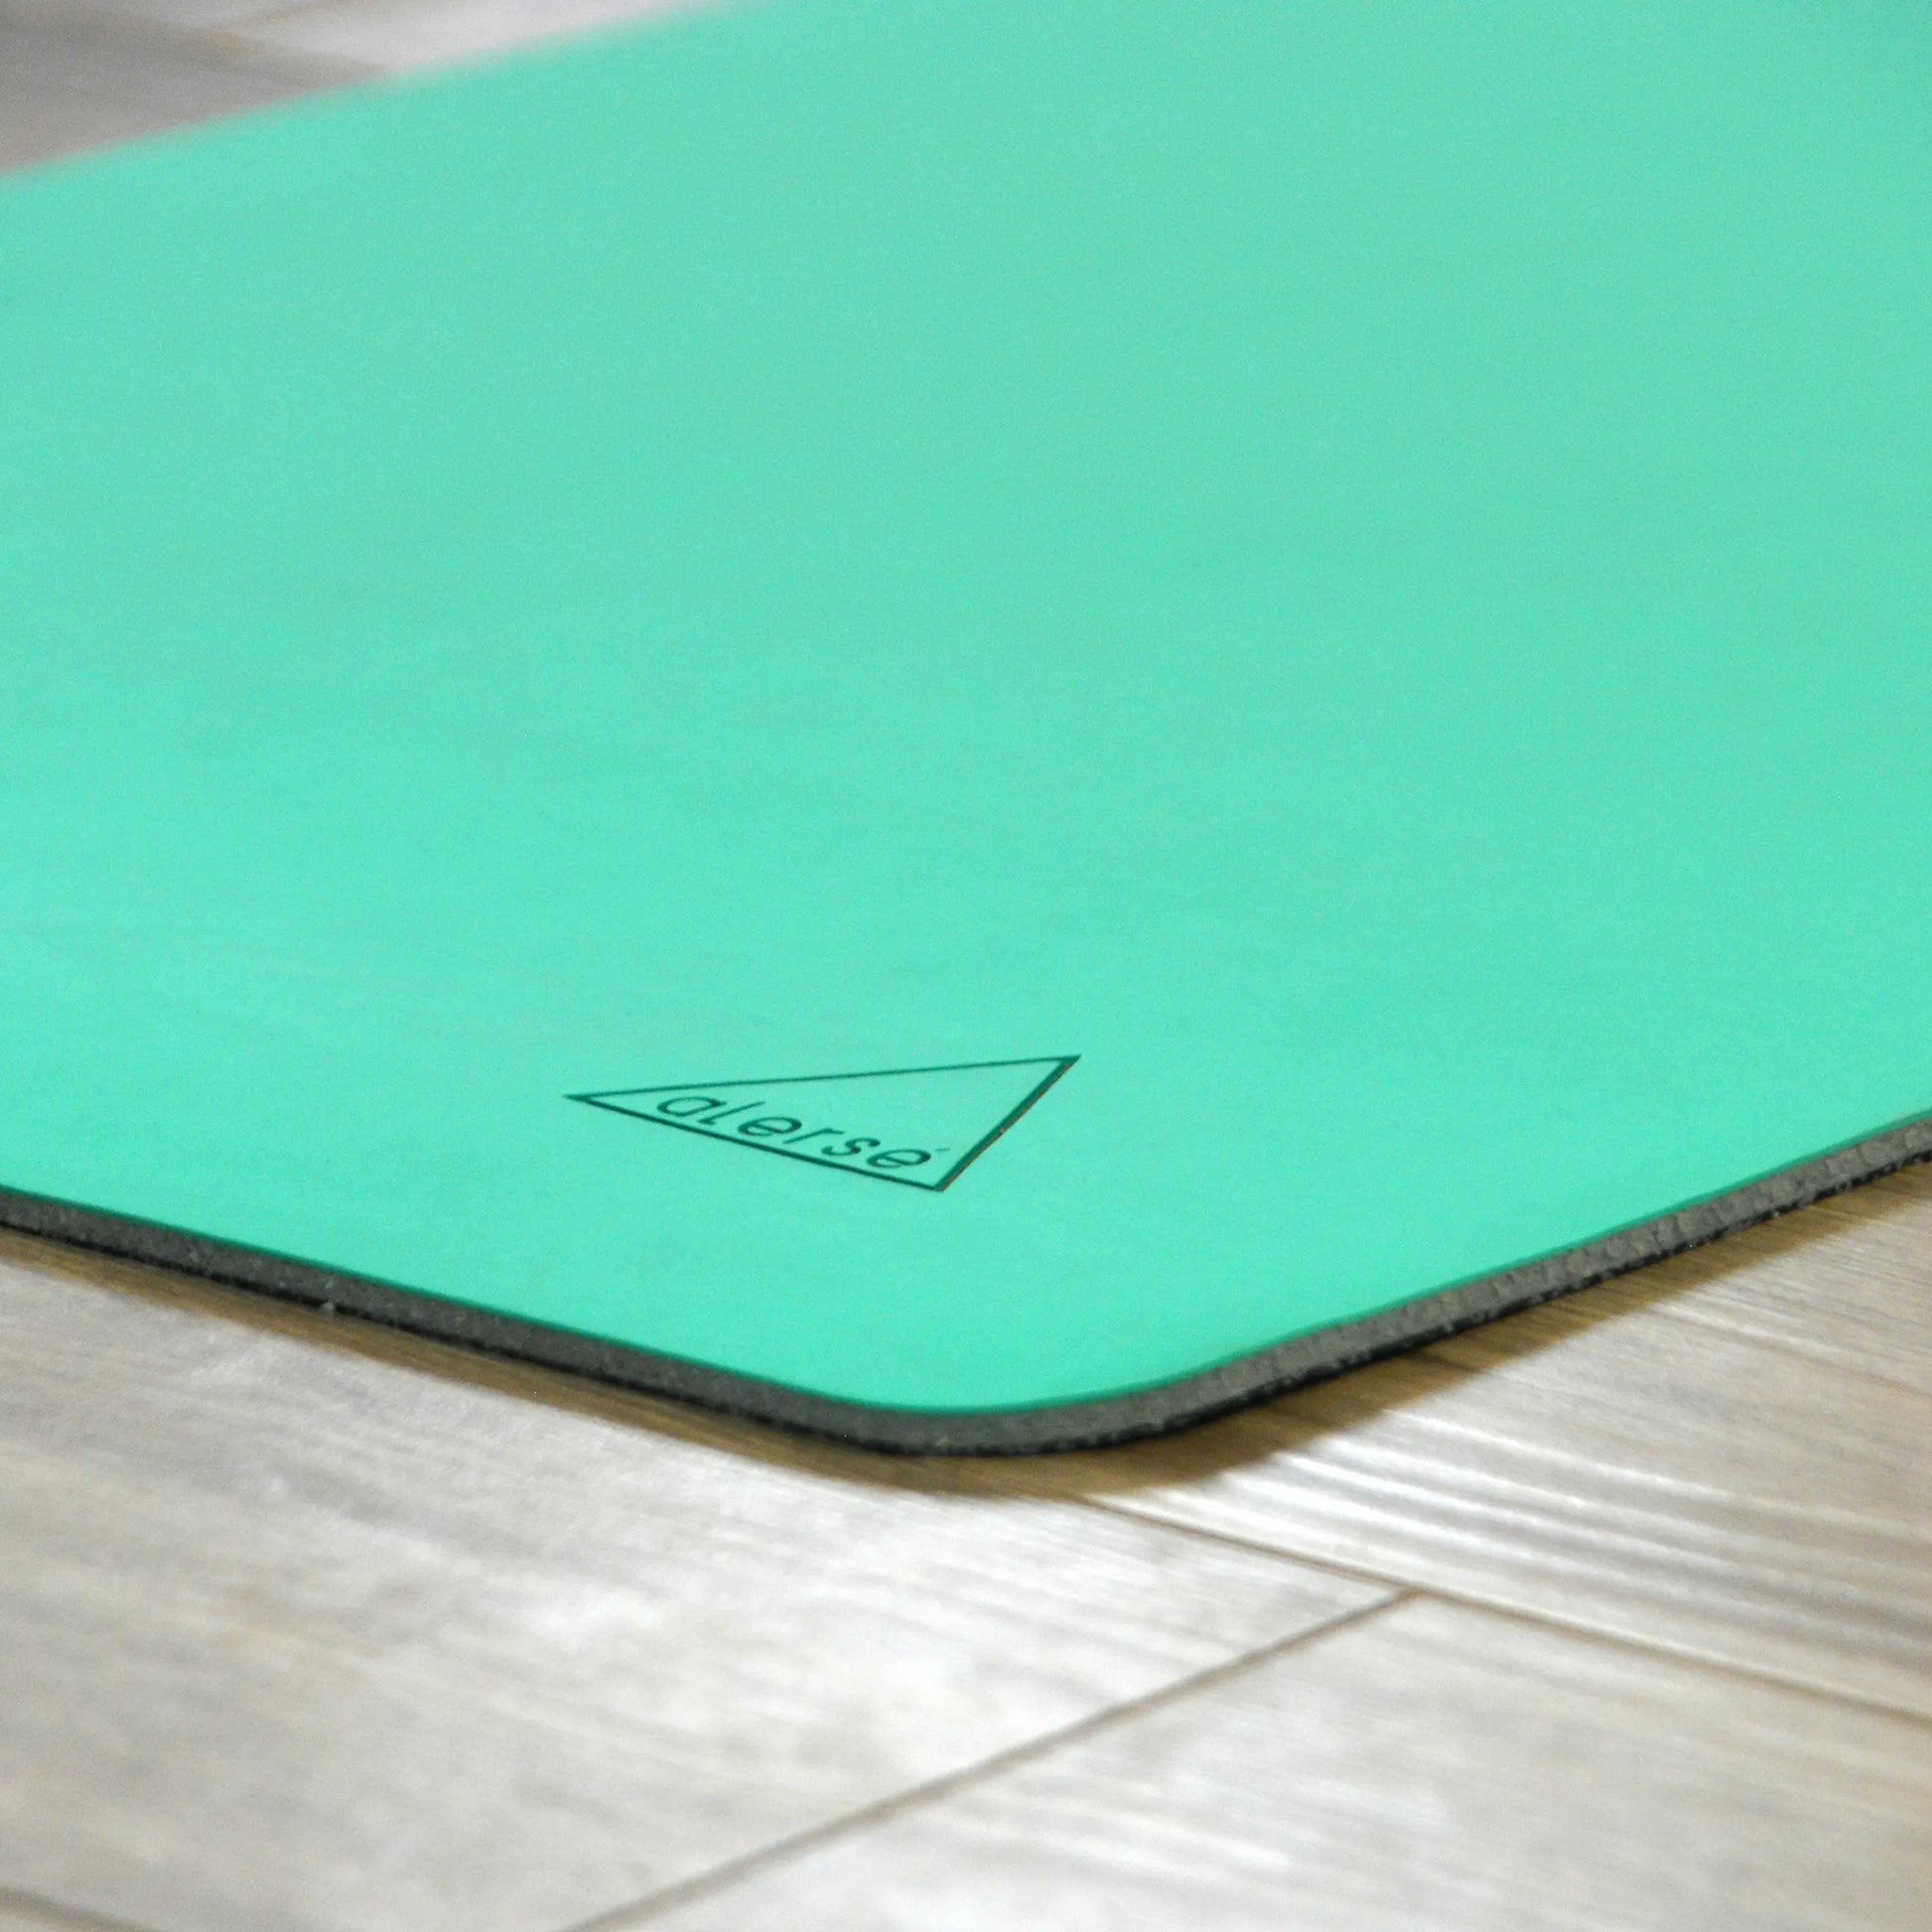 Corner of a teal yoga mat with a Alerse logo on it.